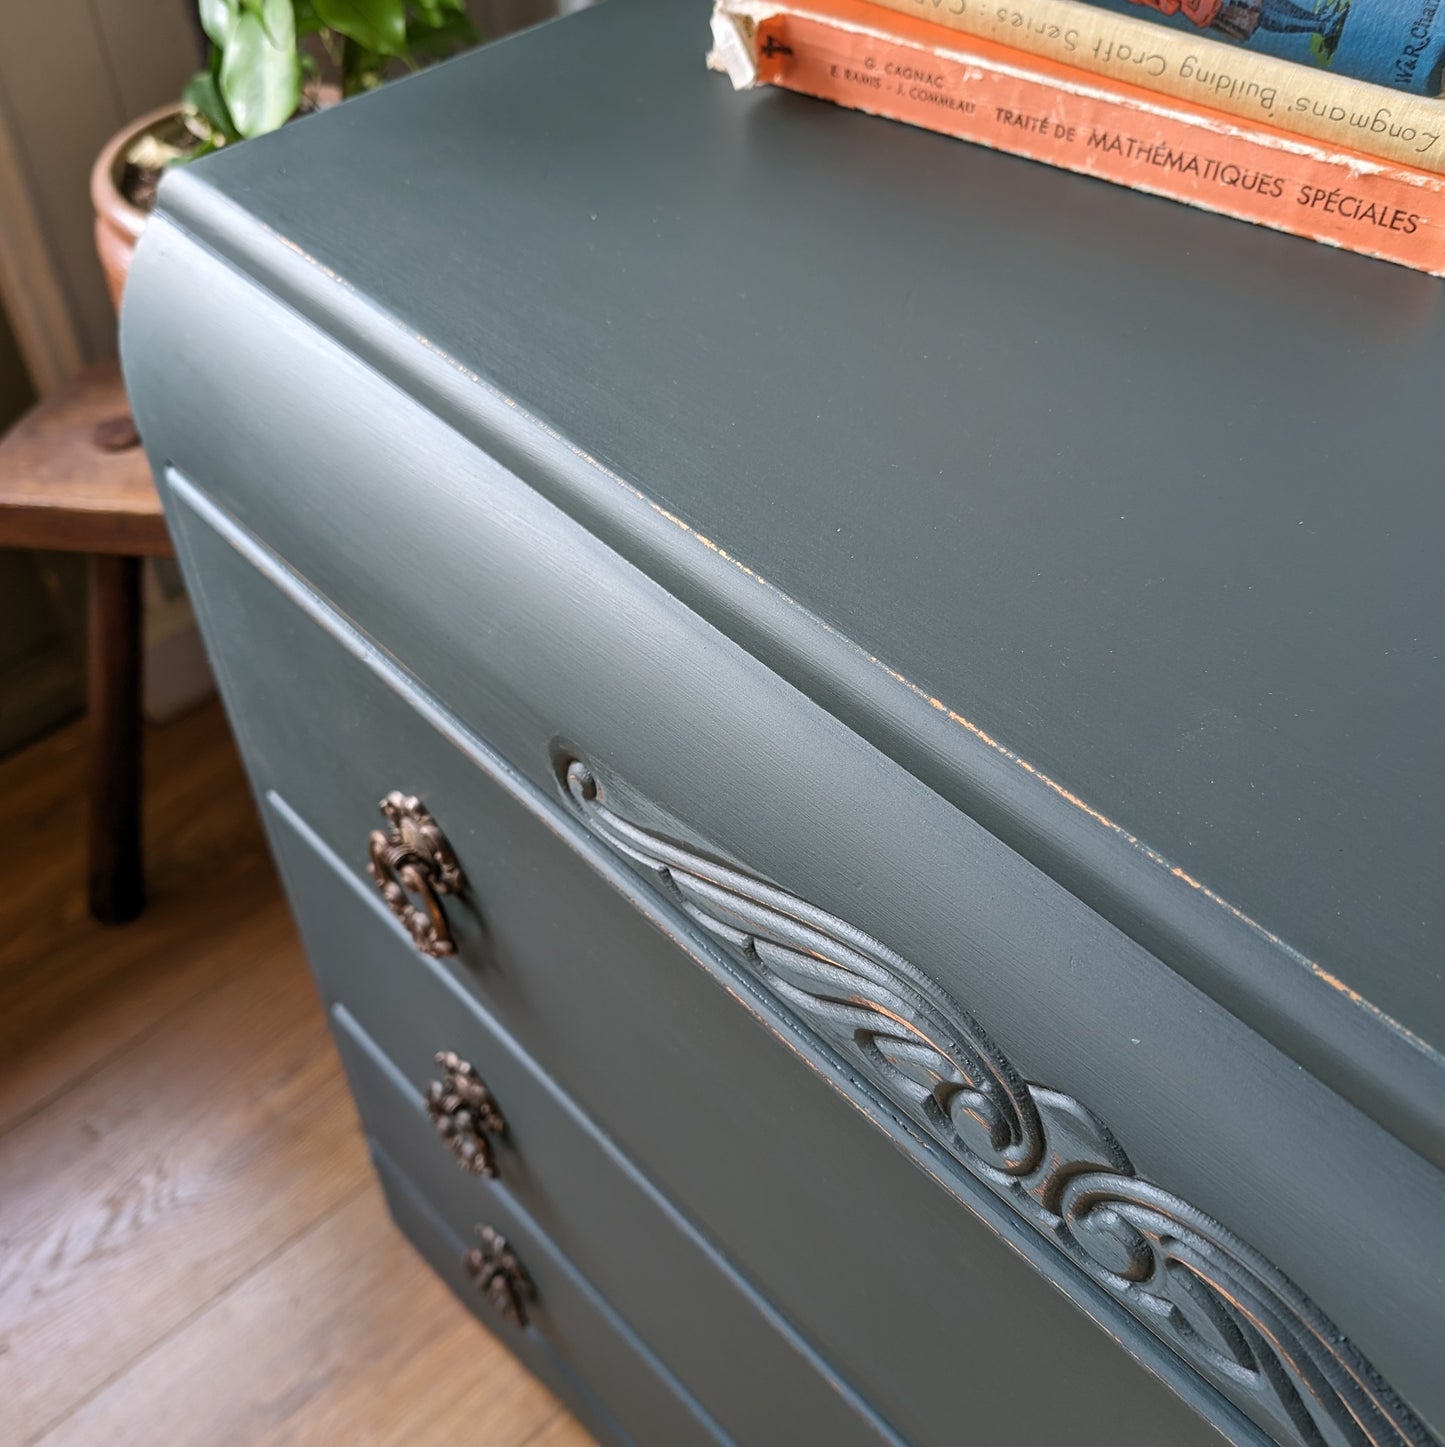 Small Painted Vintage Chest of Drawers